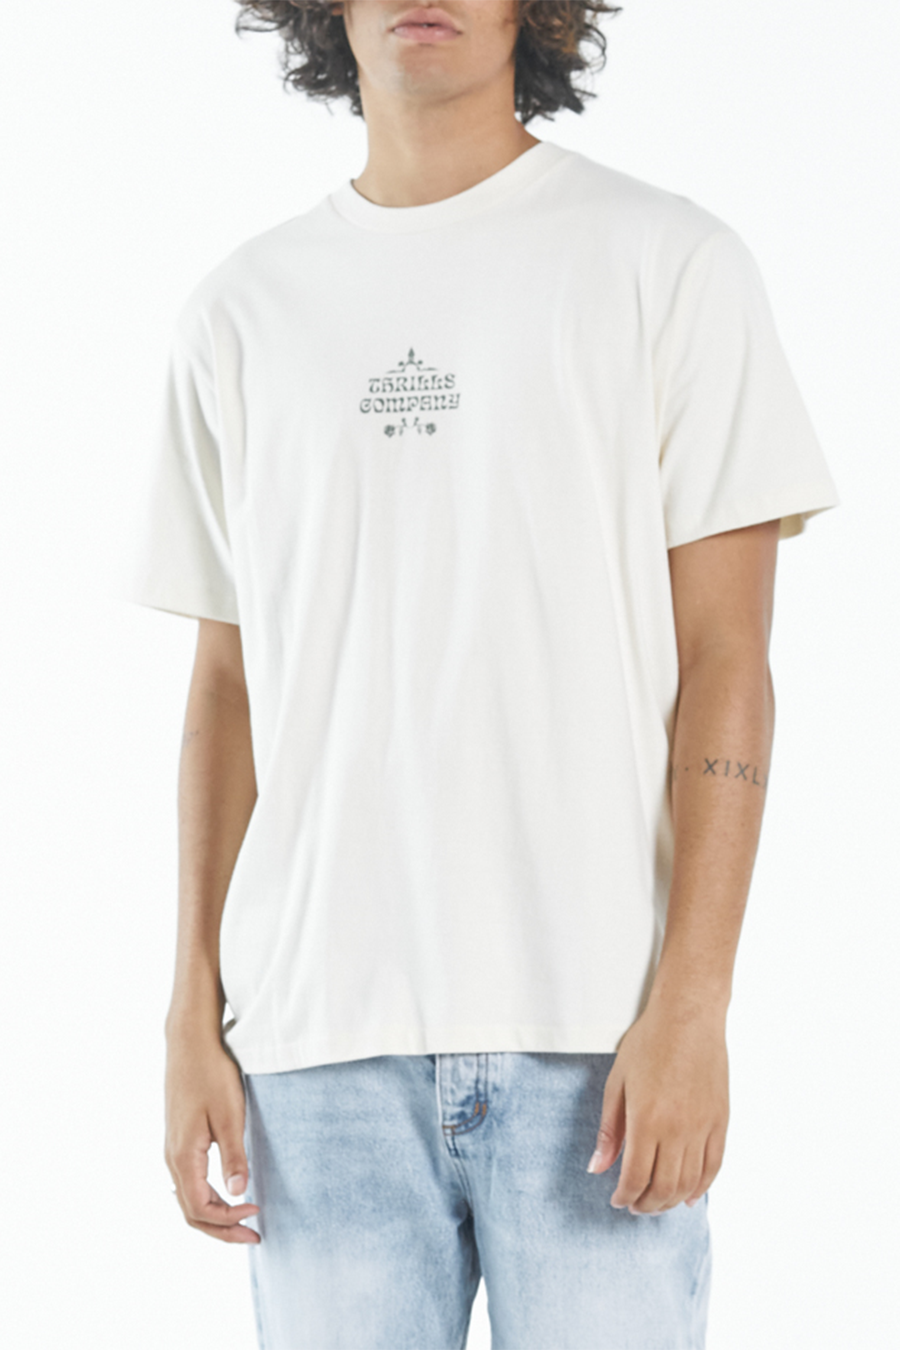 Hippie Pit Merch Tee | Heritage White - Main Image Number 1 of 1